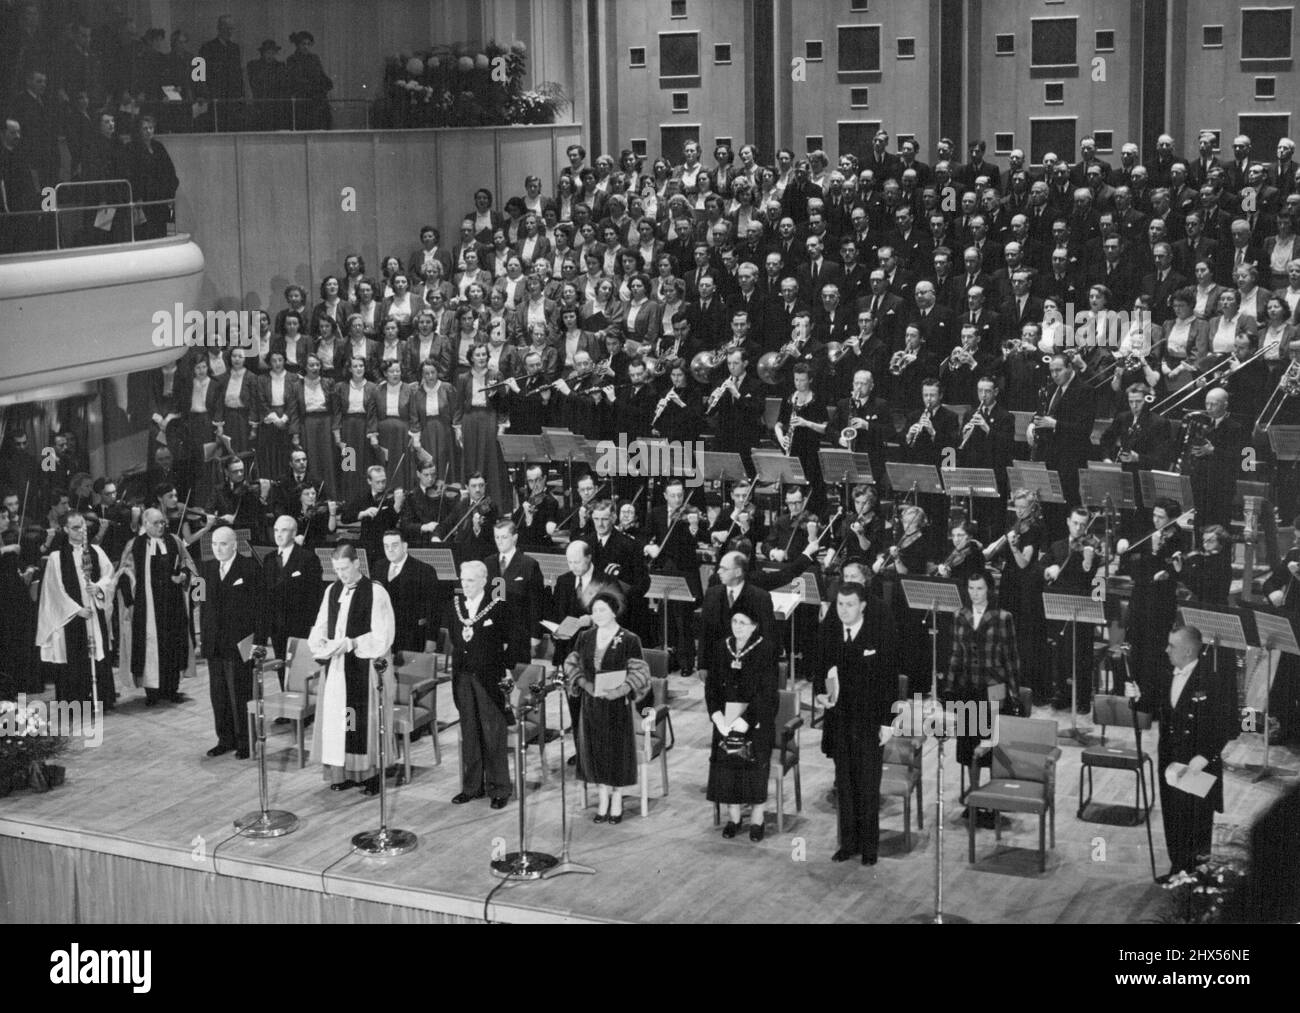 The Queen Opens Manchester's Rebuilt Free Trade Hall -- The scene in the rebuilt Free Trade Hall, during the service prior to the inaugural concert. Her Majesty the Queen performed the opening ceremony of the rebuilt Free Trade Hall in Manchester on Friday. November 16th, unveiling a tablet at the entrance to mark the event. November 19, 1951. (Photo by Fox Photos). Stock Photo